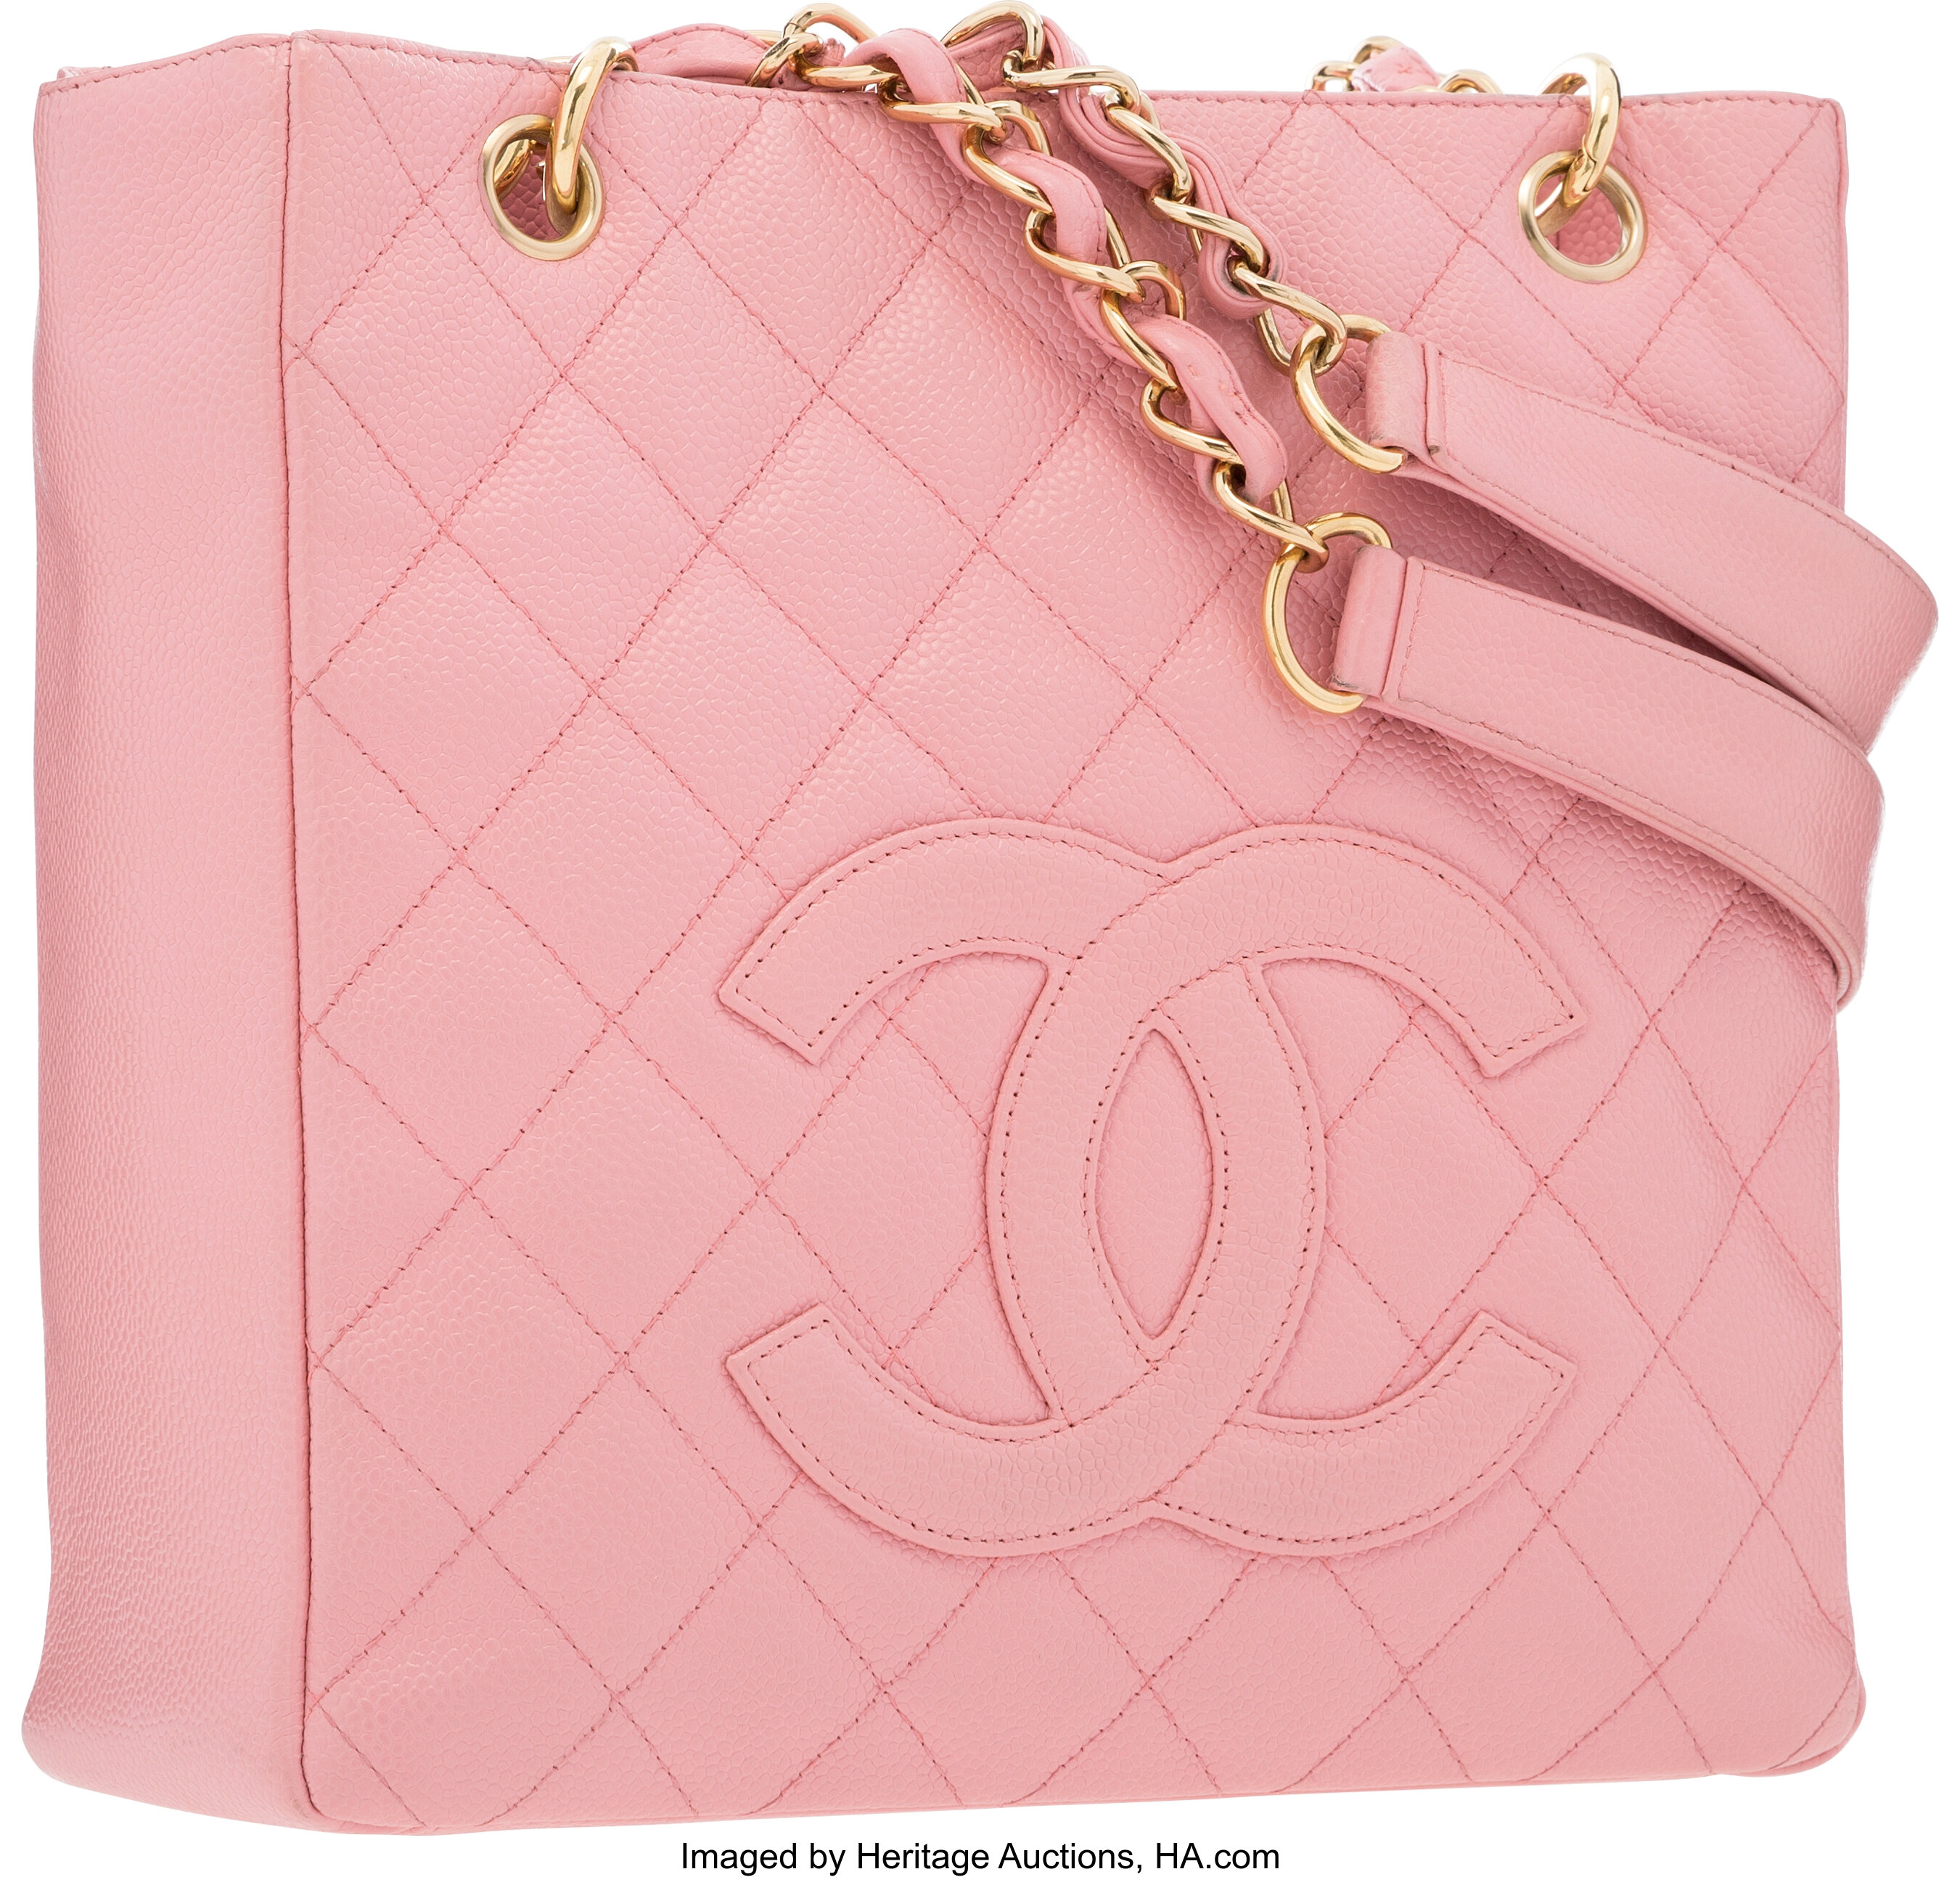 Chanel Pink Quilted Caviar Leather Petite Shopping Tote Bag with